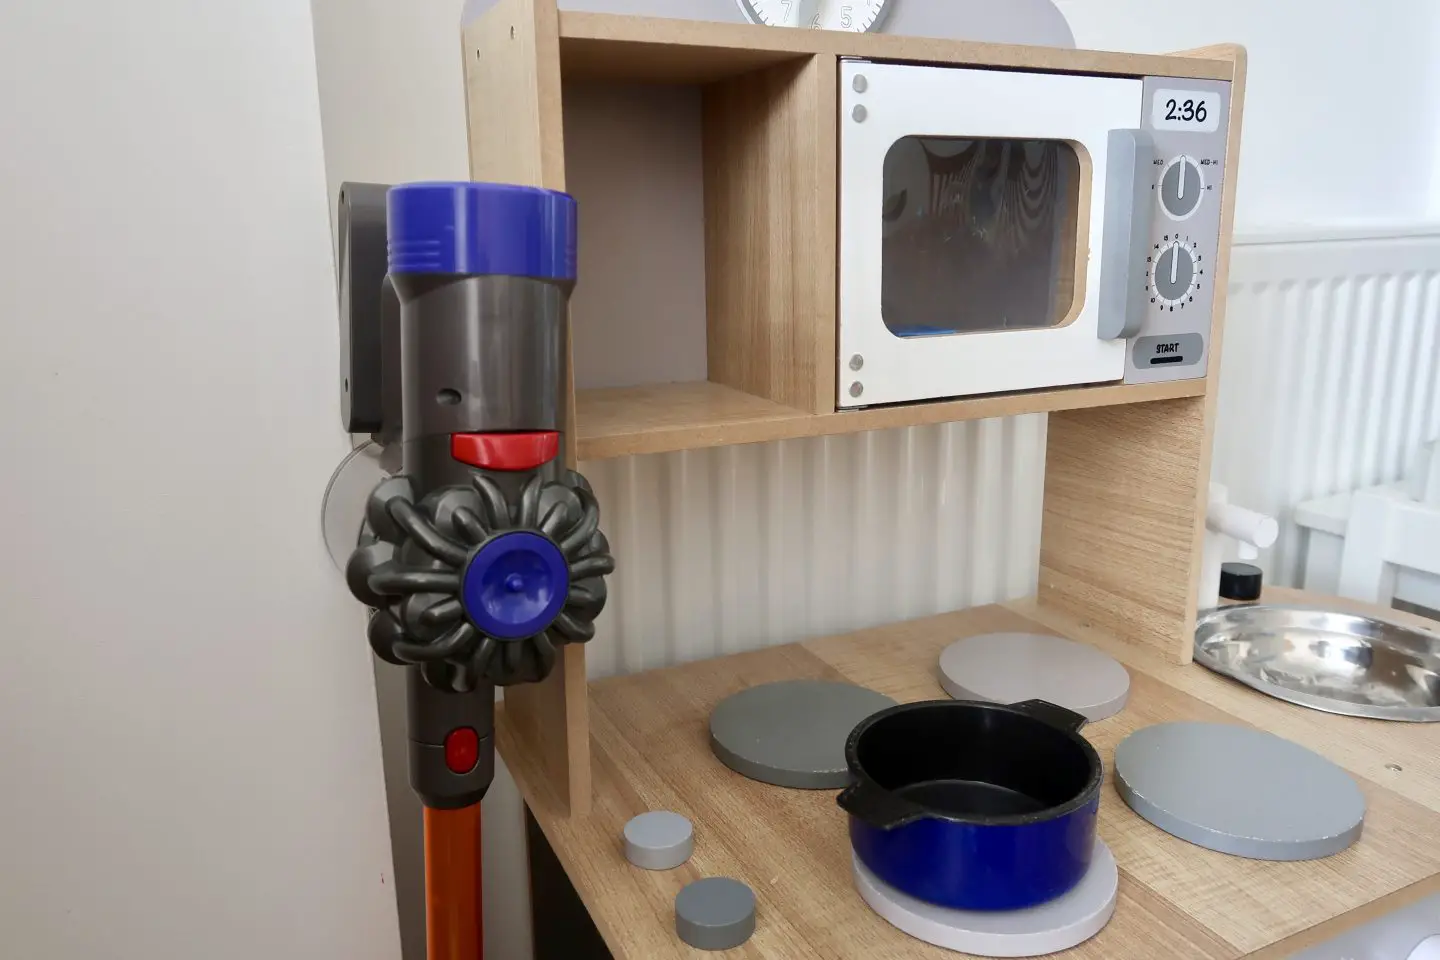 a kids toy Dyson cord-free vacuum cleaner next to a toy kitchen